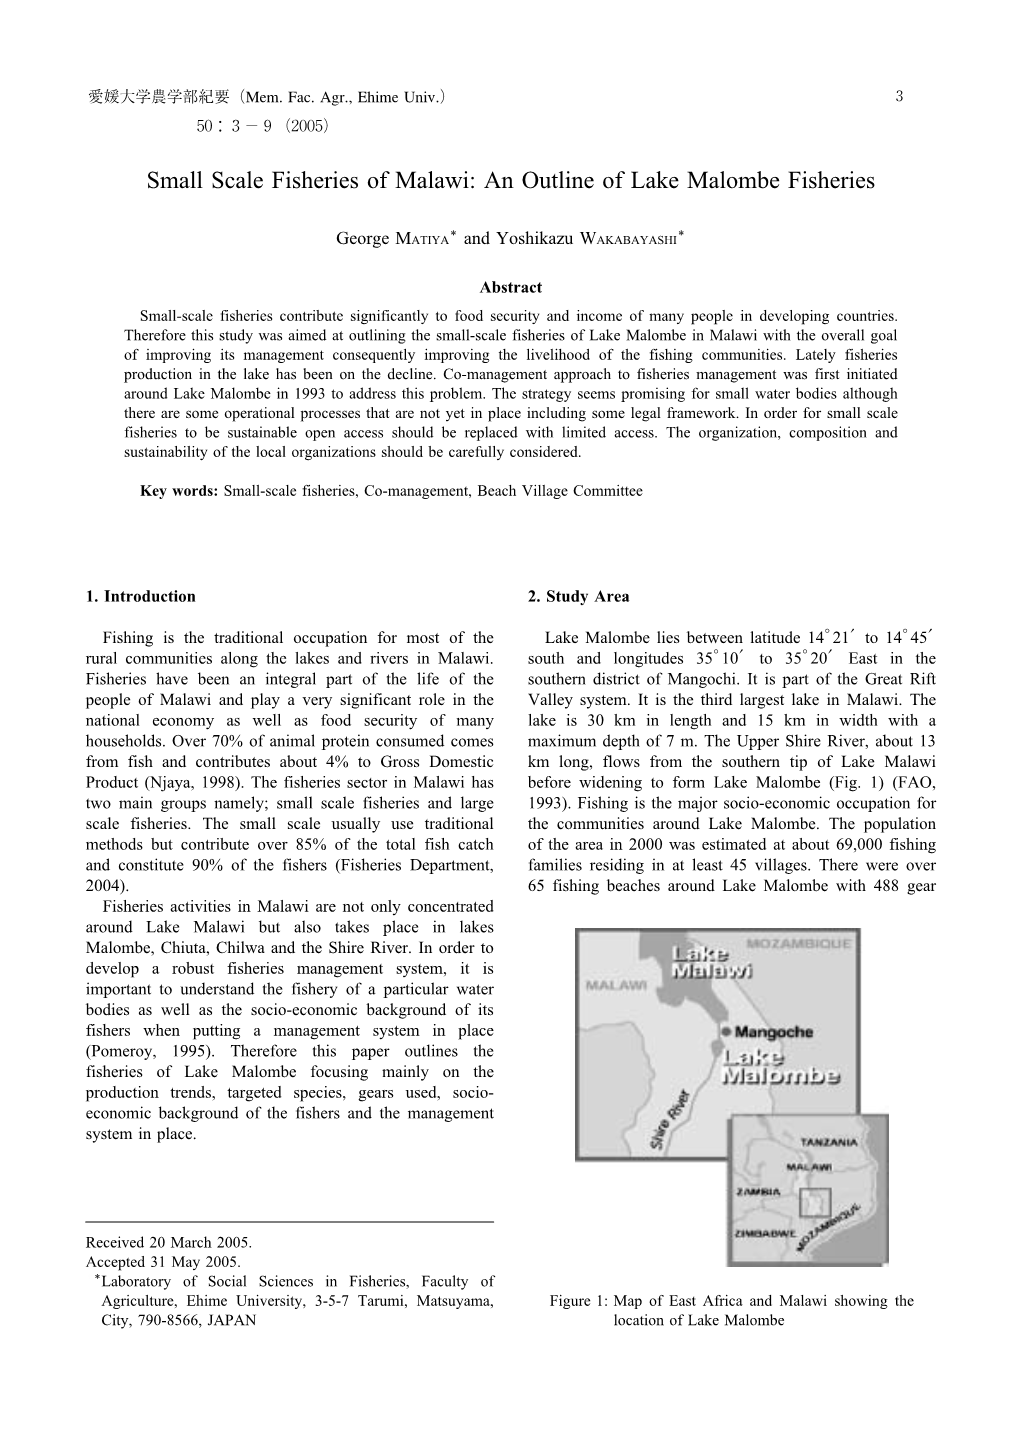 Small Scale Fisheries of Malawi: an Outline of Lake Malombe Fisheries